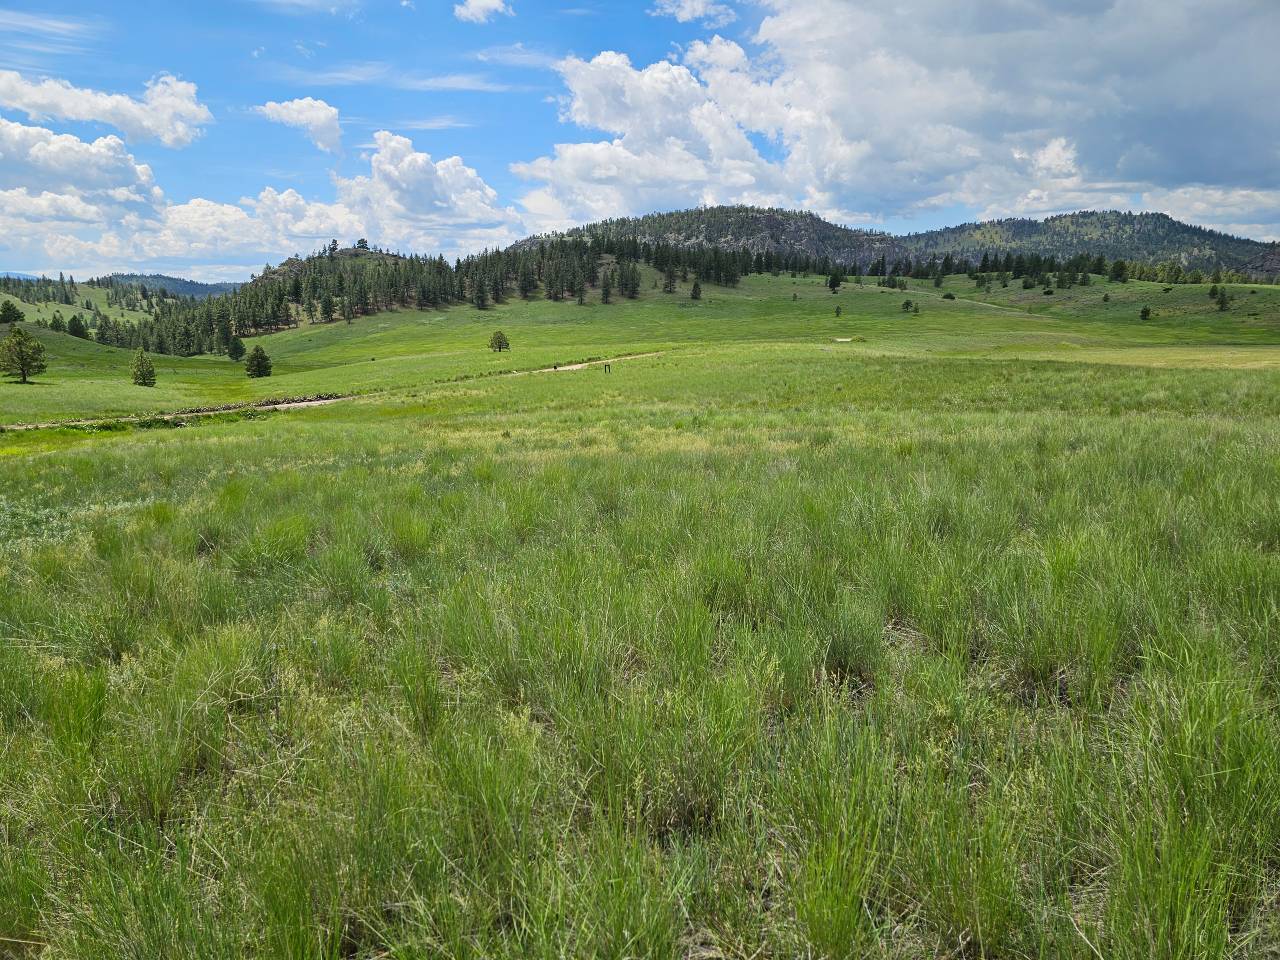 acreage for sale, acreage for sale by owner, acreage for sale in montana, acreage in montana, buy land, buy land in montana, buy land montana, buy montana land, cheap land, cheap land for sale, cheap land for sale in montana, cheap land montana, cheap montana land, cheap off grid land, cheap off grid land for sale, for sale by owner, forsalebyowner, forsalebyowner montana, fsbo, fsbo montana, fsbo real estate, horse property for sale, horse property for sale in montana, hunting land for sale by owner, hunting land for sale in montana, hunting property for sale, hunting property for sale in montana, land for sale by owner, land for sale in Montana, land for sale Montana, land in Montana, lands for sale, landwatch, landwatch montana, montana acreages for sale, montana hunting land for sale, montana land, montana land for sale, montana land for sale by owner, montana mountain land for sale, montana property, Montana property for sale, montana real estate, mountain land for sale, mountain land for sale in montana, mountain properties for sale, mountain property for sale, mountain real estate, off grid land, off grid land for sale, off grid property for sale, off grid real estate, off the grid, property, property for sale by owner, property for sale by owner in montana, property for sale in Montana, property for sale montana, property in Montana, remote properties, remote property for sale, western montana land for sale